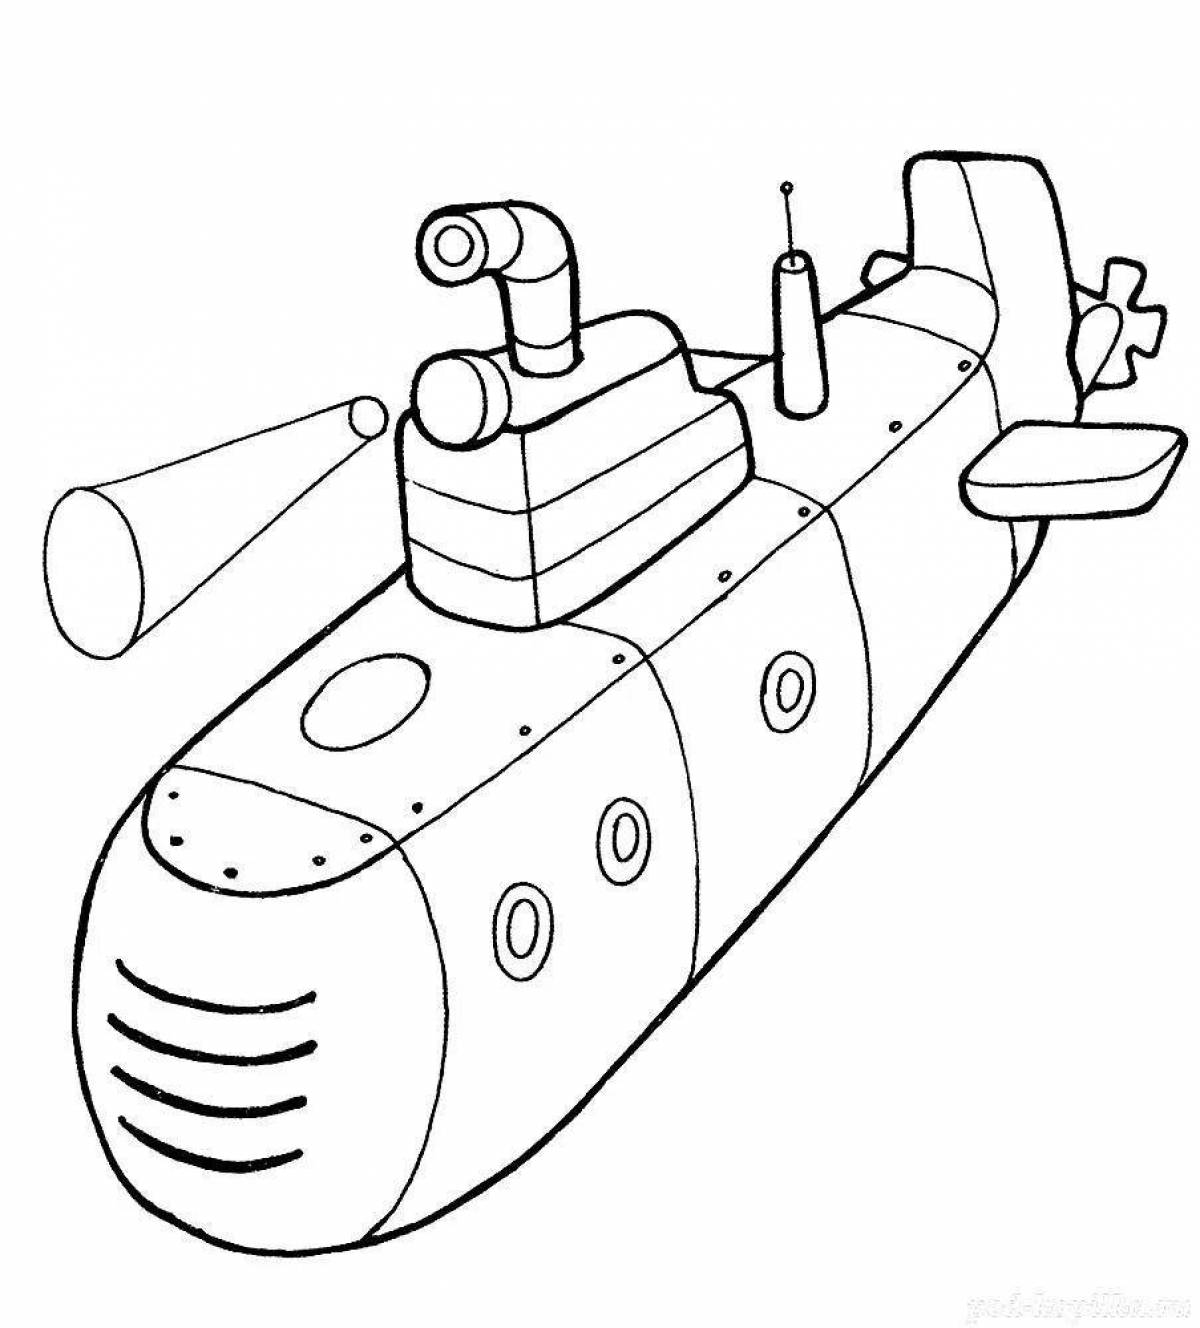 Military vehicle coloring page